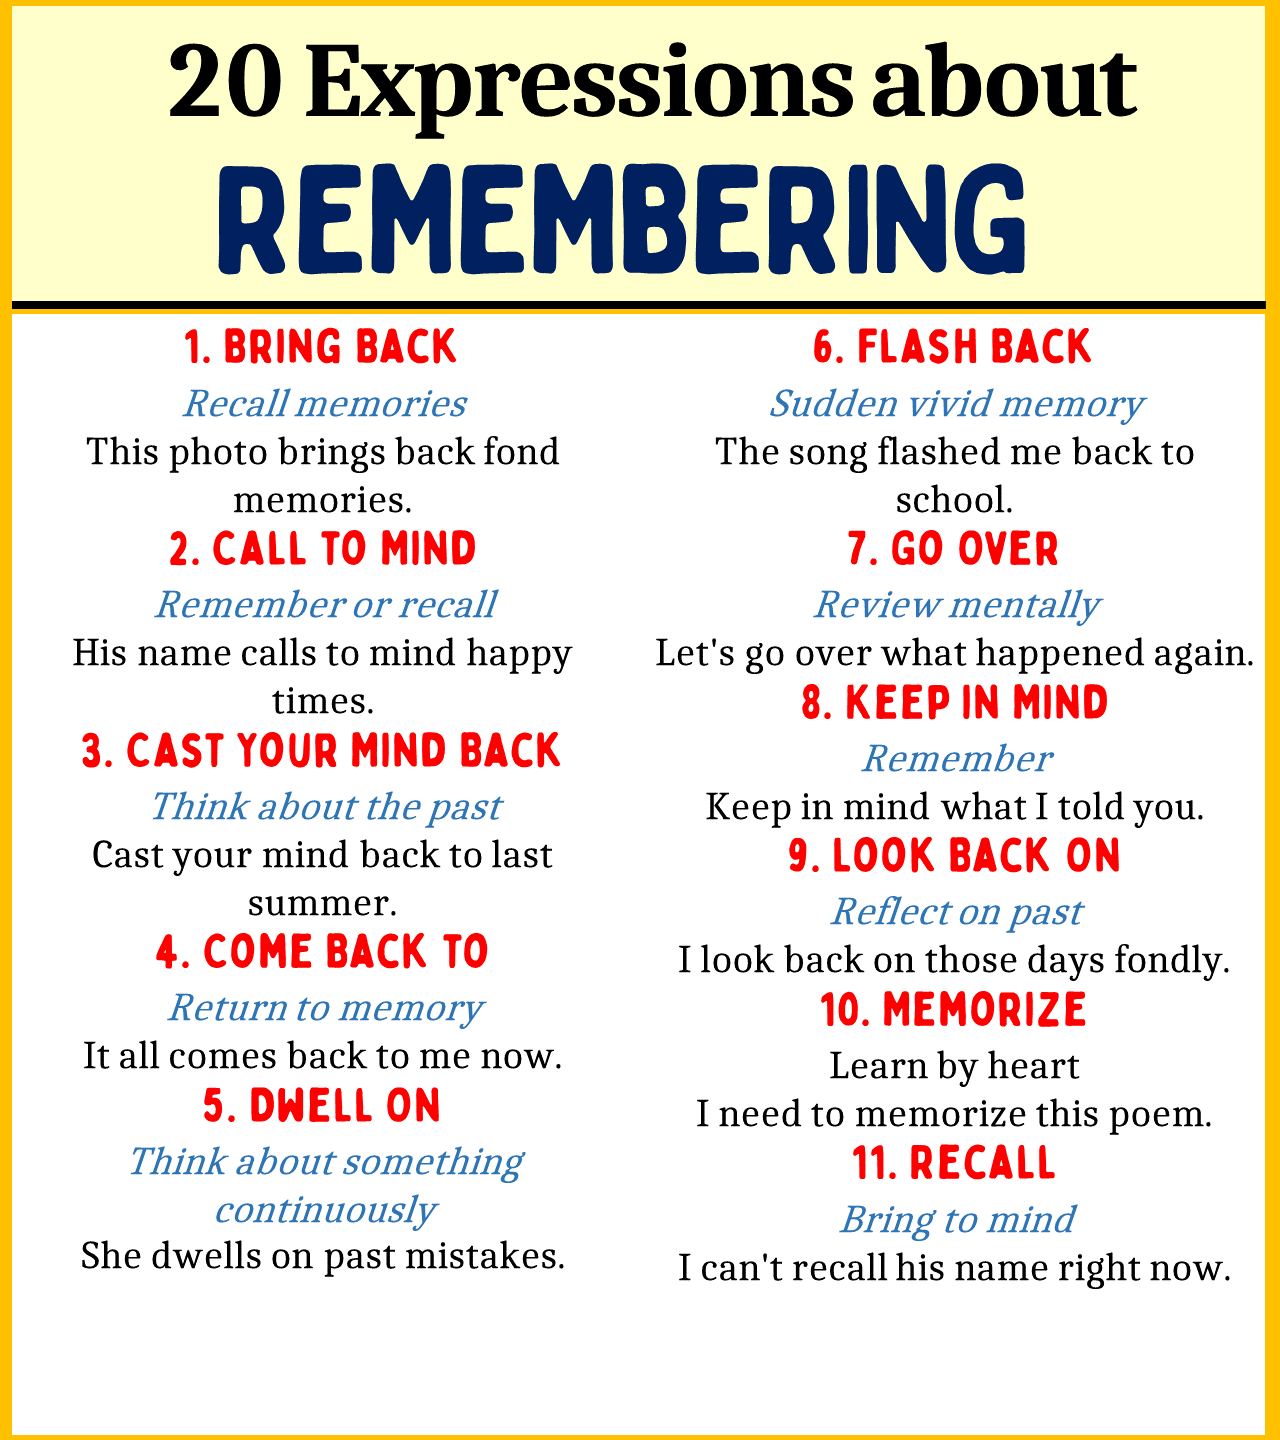 Expressions About REMEMBERING